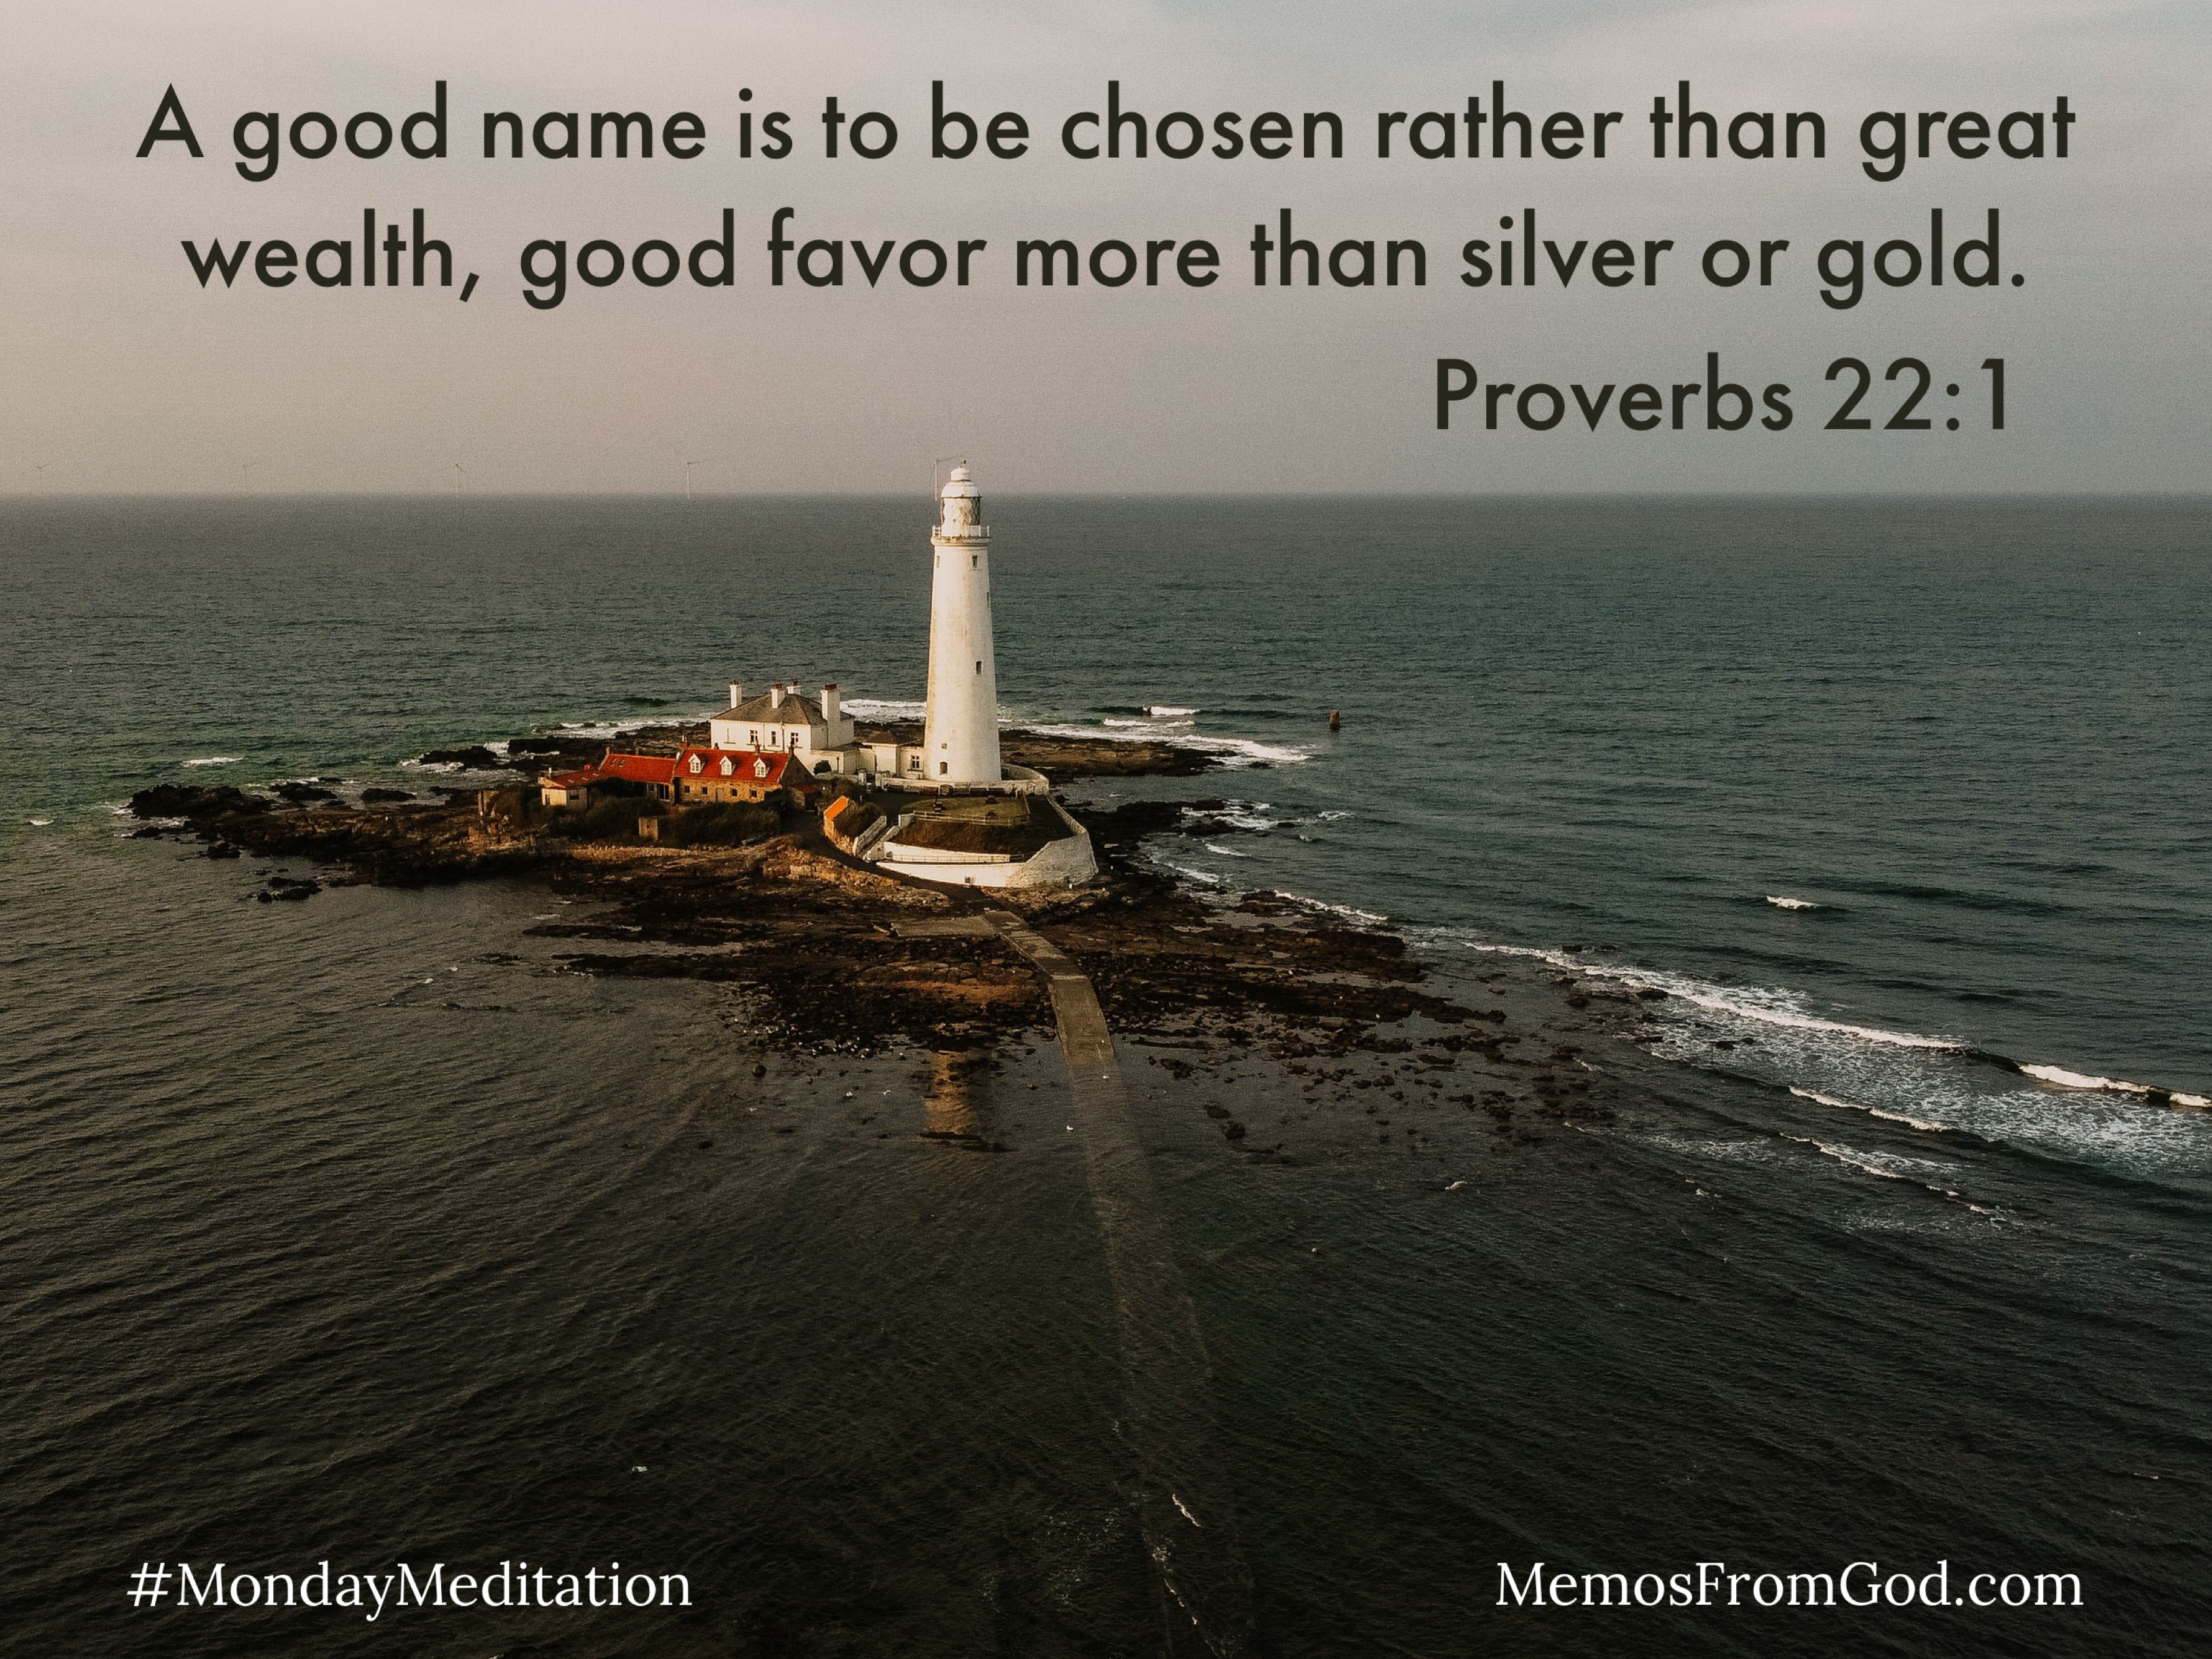 A bright white lighthouse stands with other buildings on an island barely big enough to contain them, in a dark sea under a grey sky. Caption: A good name is to be chosen rather than great wealth, good favor more than silver or gold. Proverbs 22:1